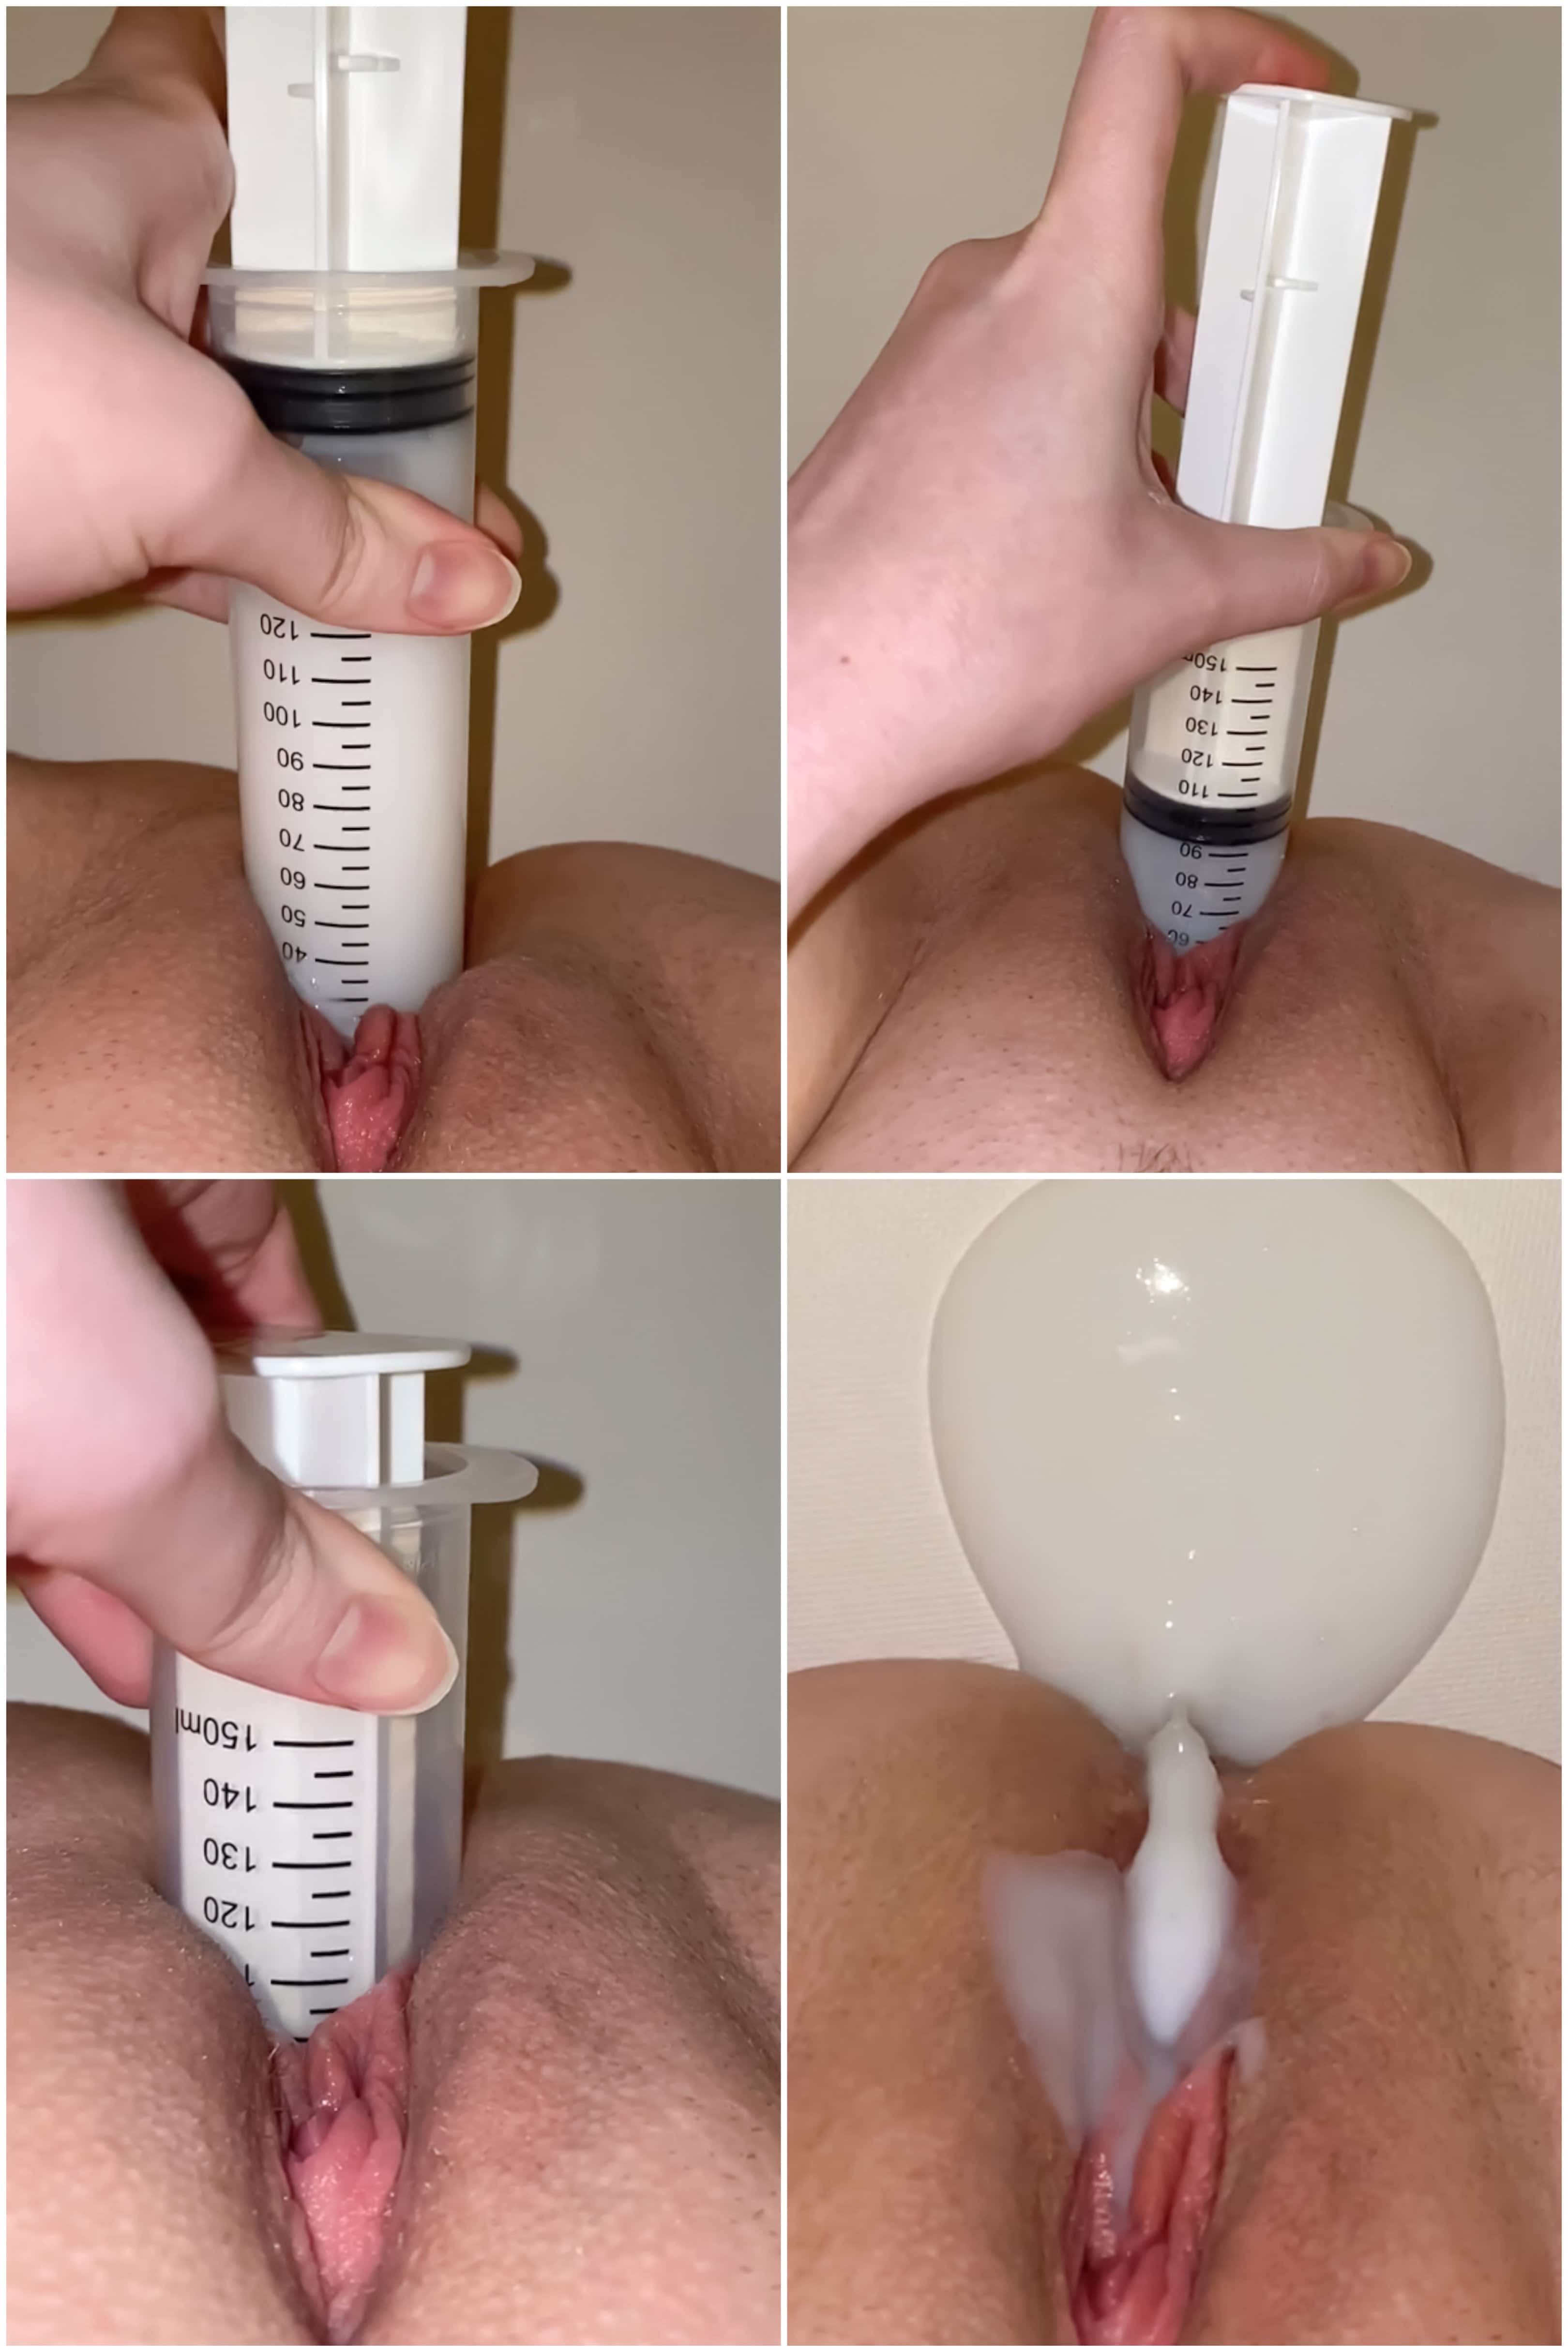 Artificial insemination with sperm as lubricant | Sperm ice cubes